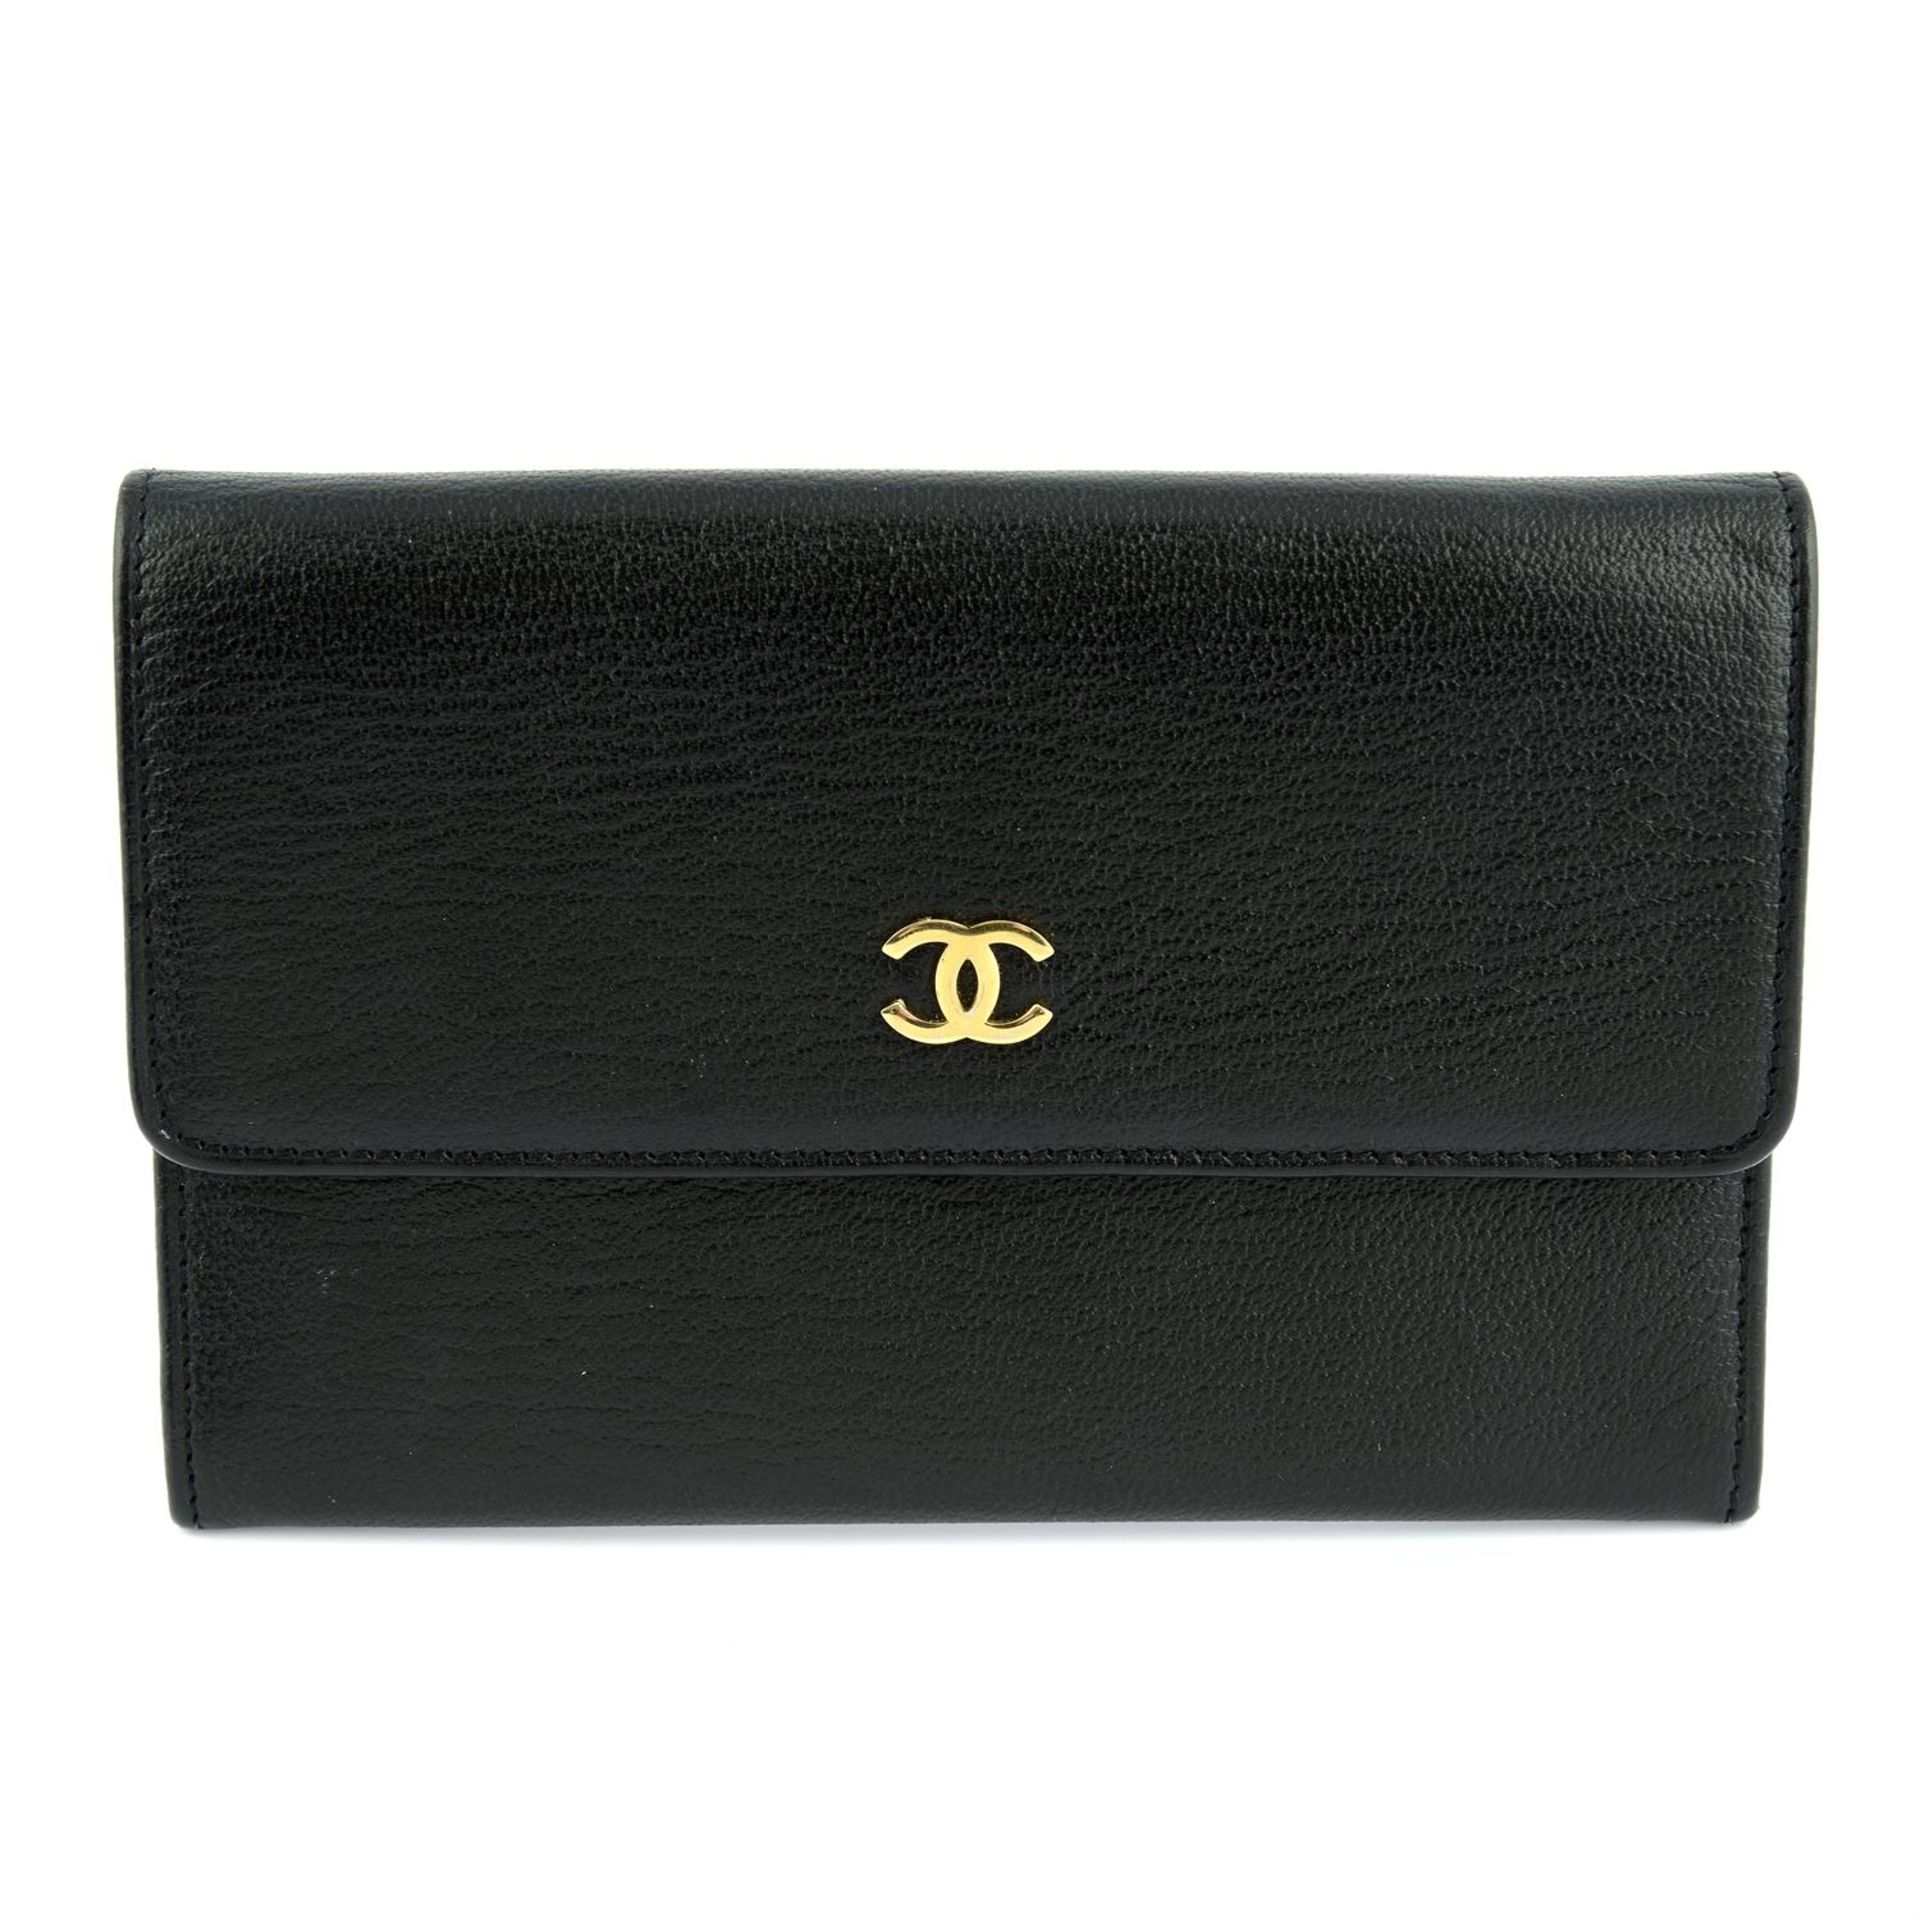 CHANEL - a compact flap wallet.